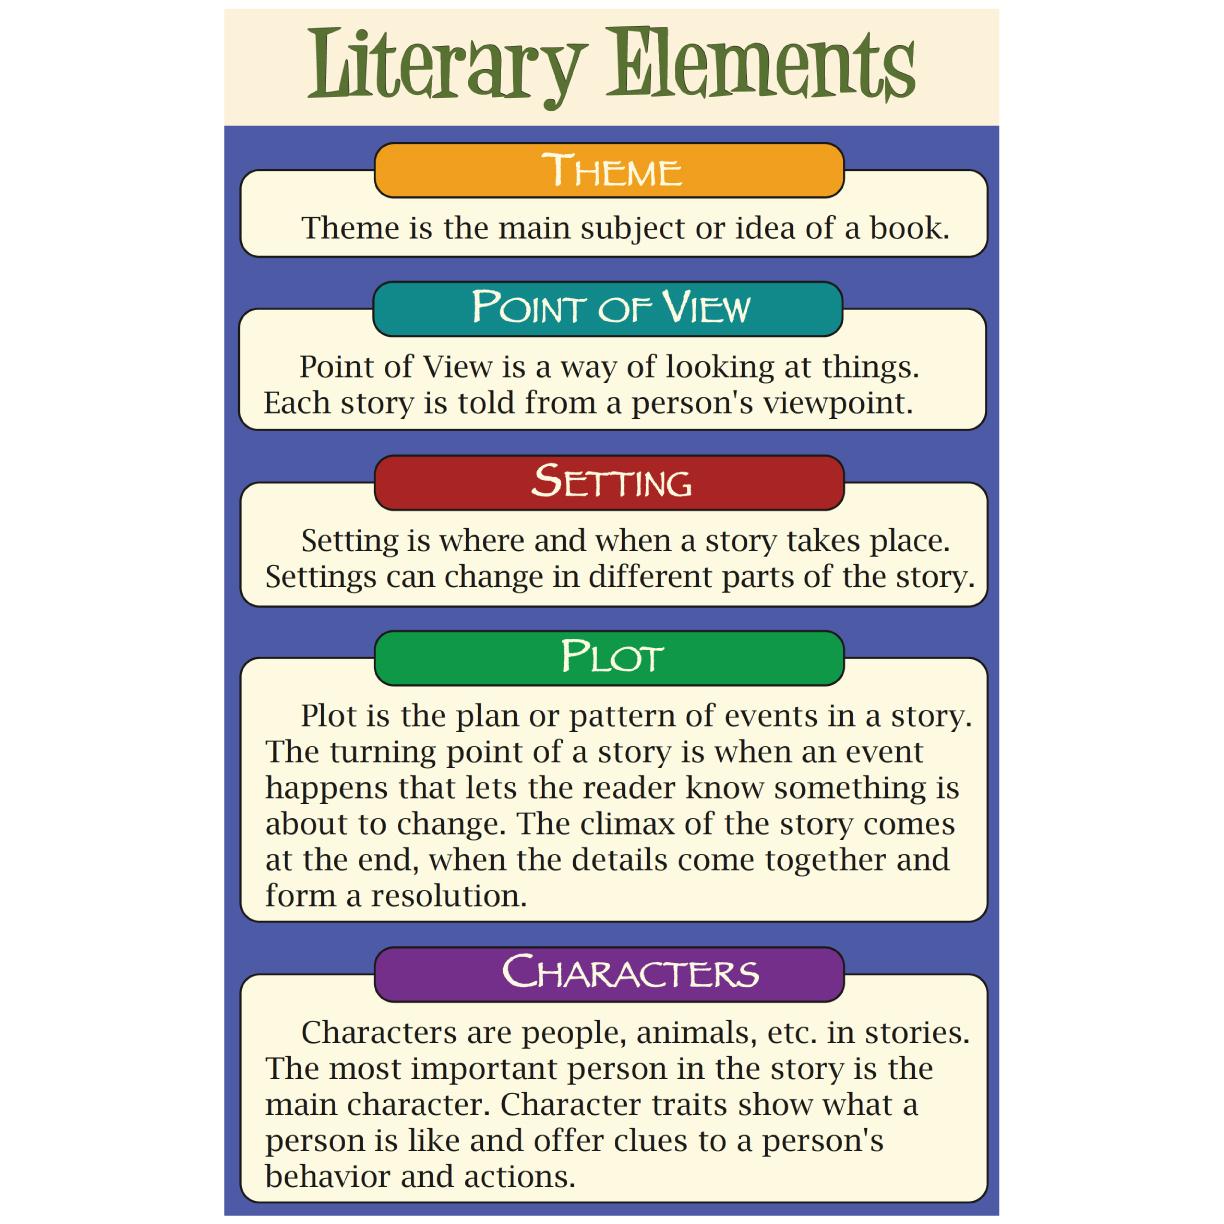 importance of literary elements essay